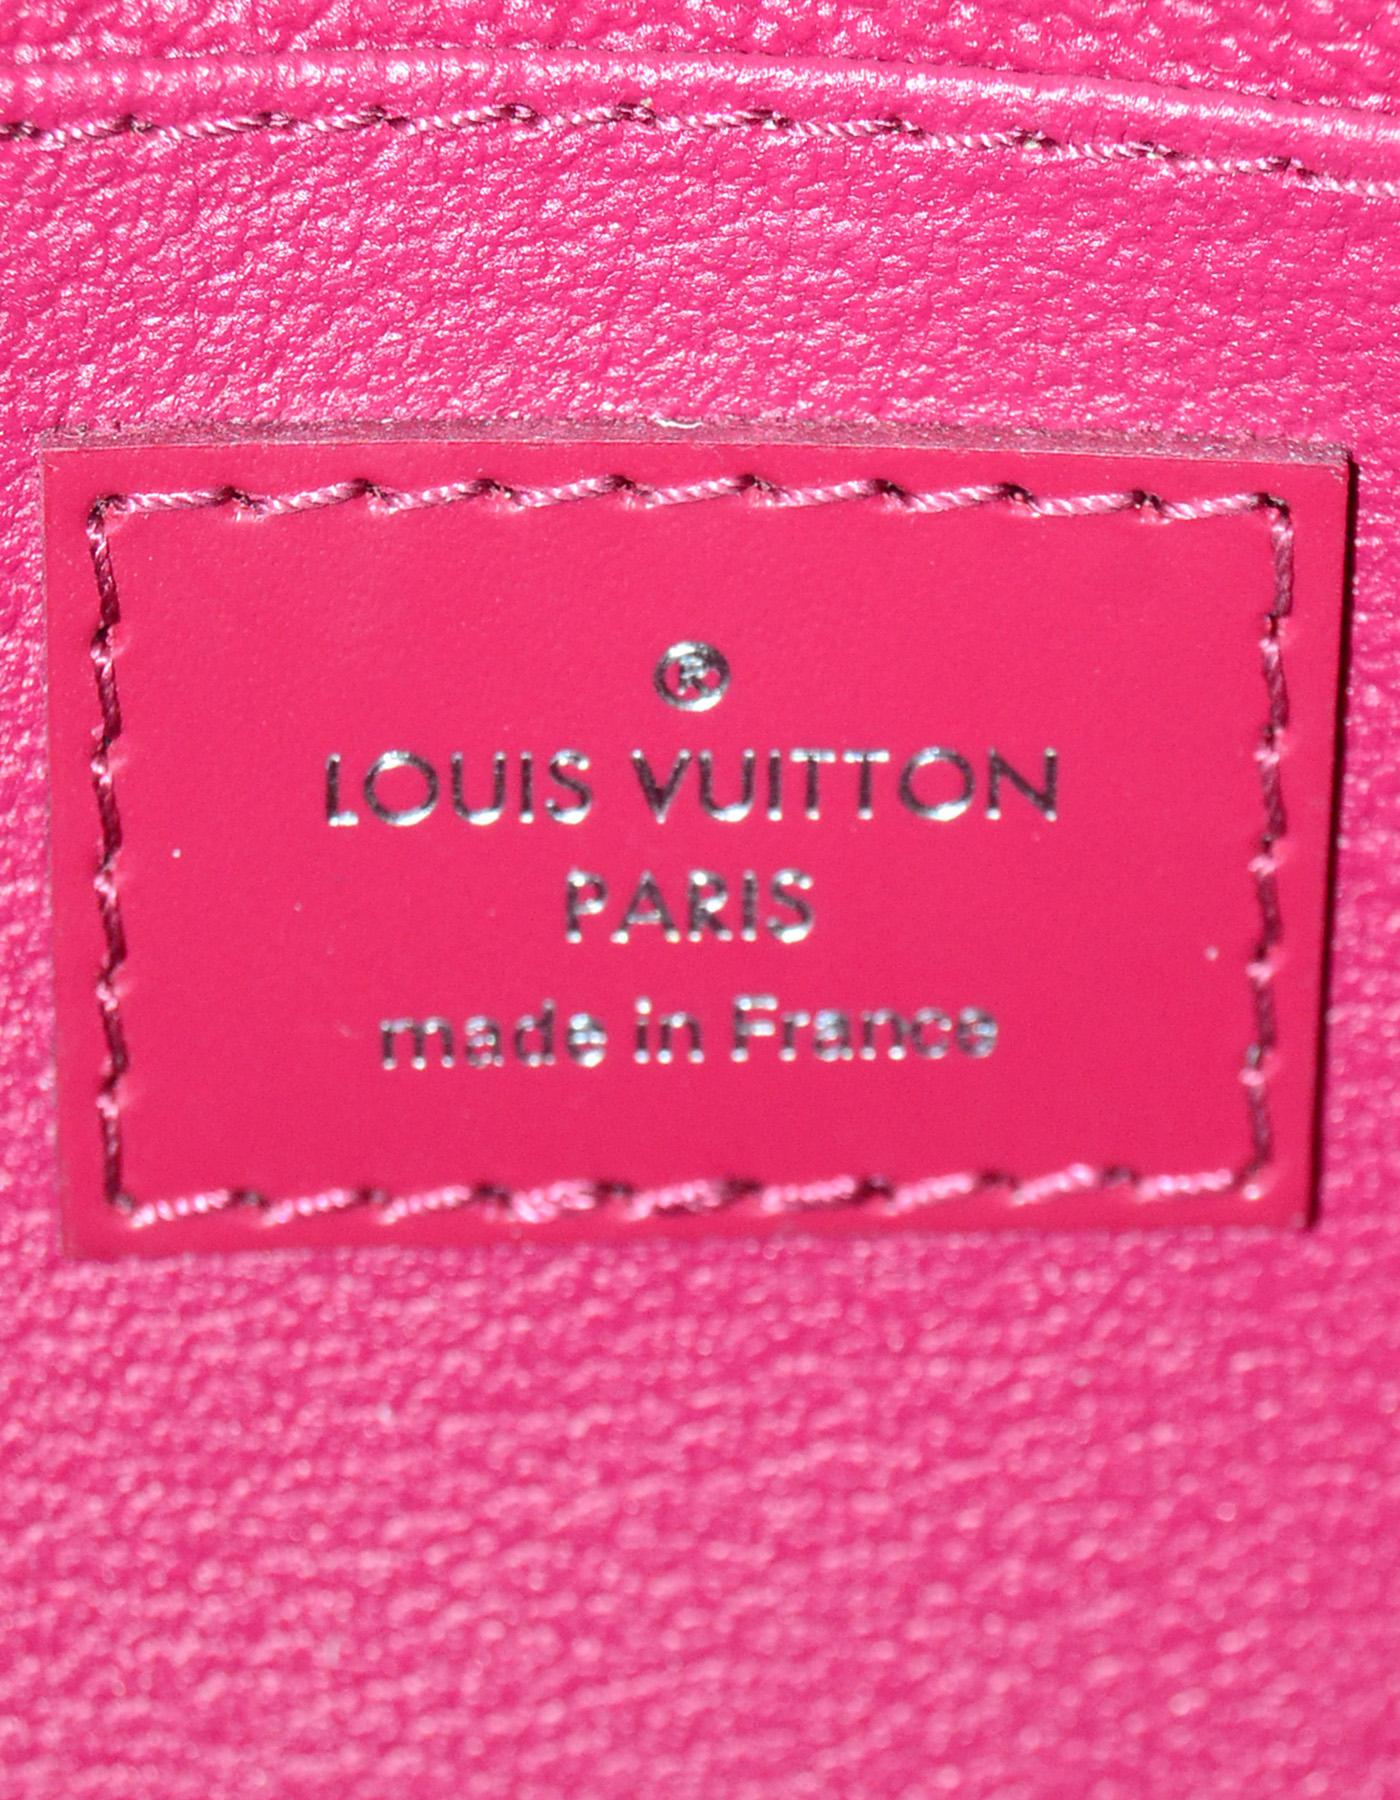 Louis Vuitton 2017 Fuchsia Pink Epi Leather Cosmetic Pouch 3